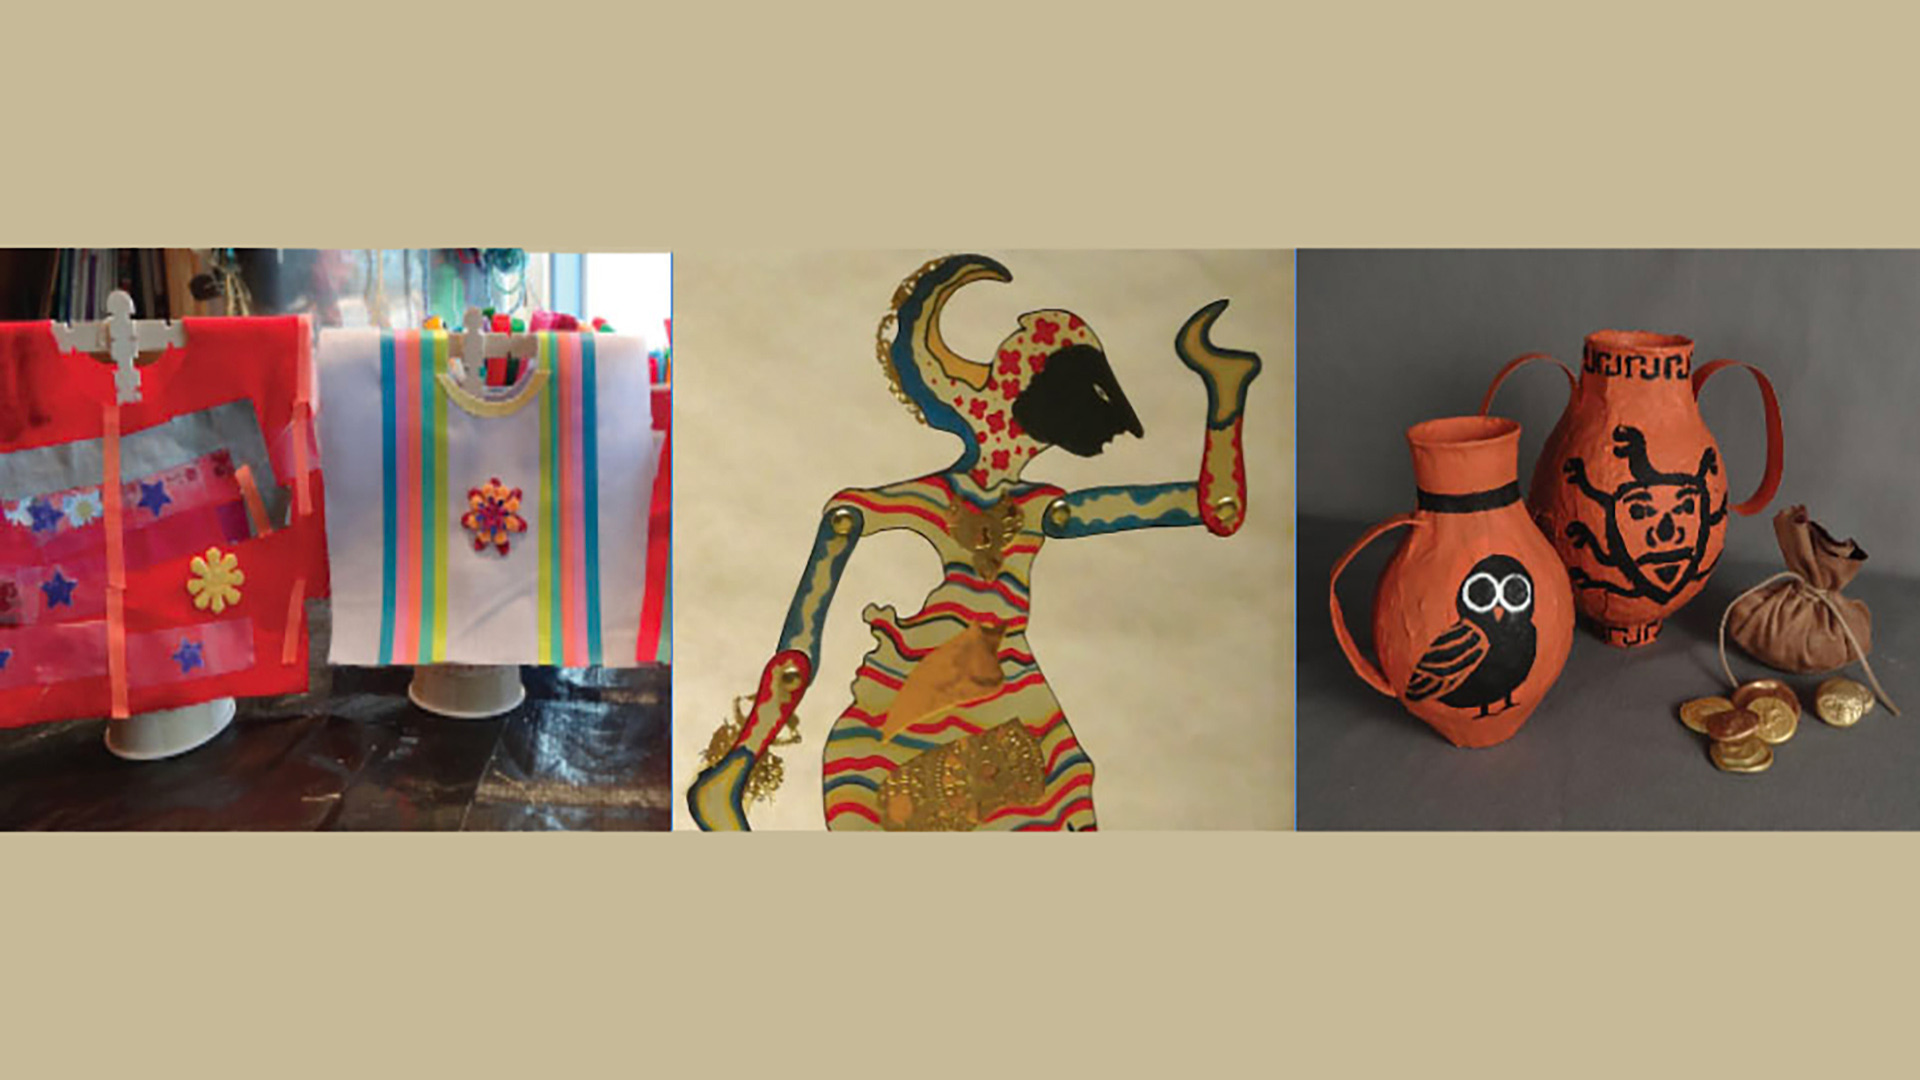 Artifacts including textiles, a painting of a woman, pottery, and coins 